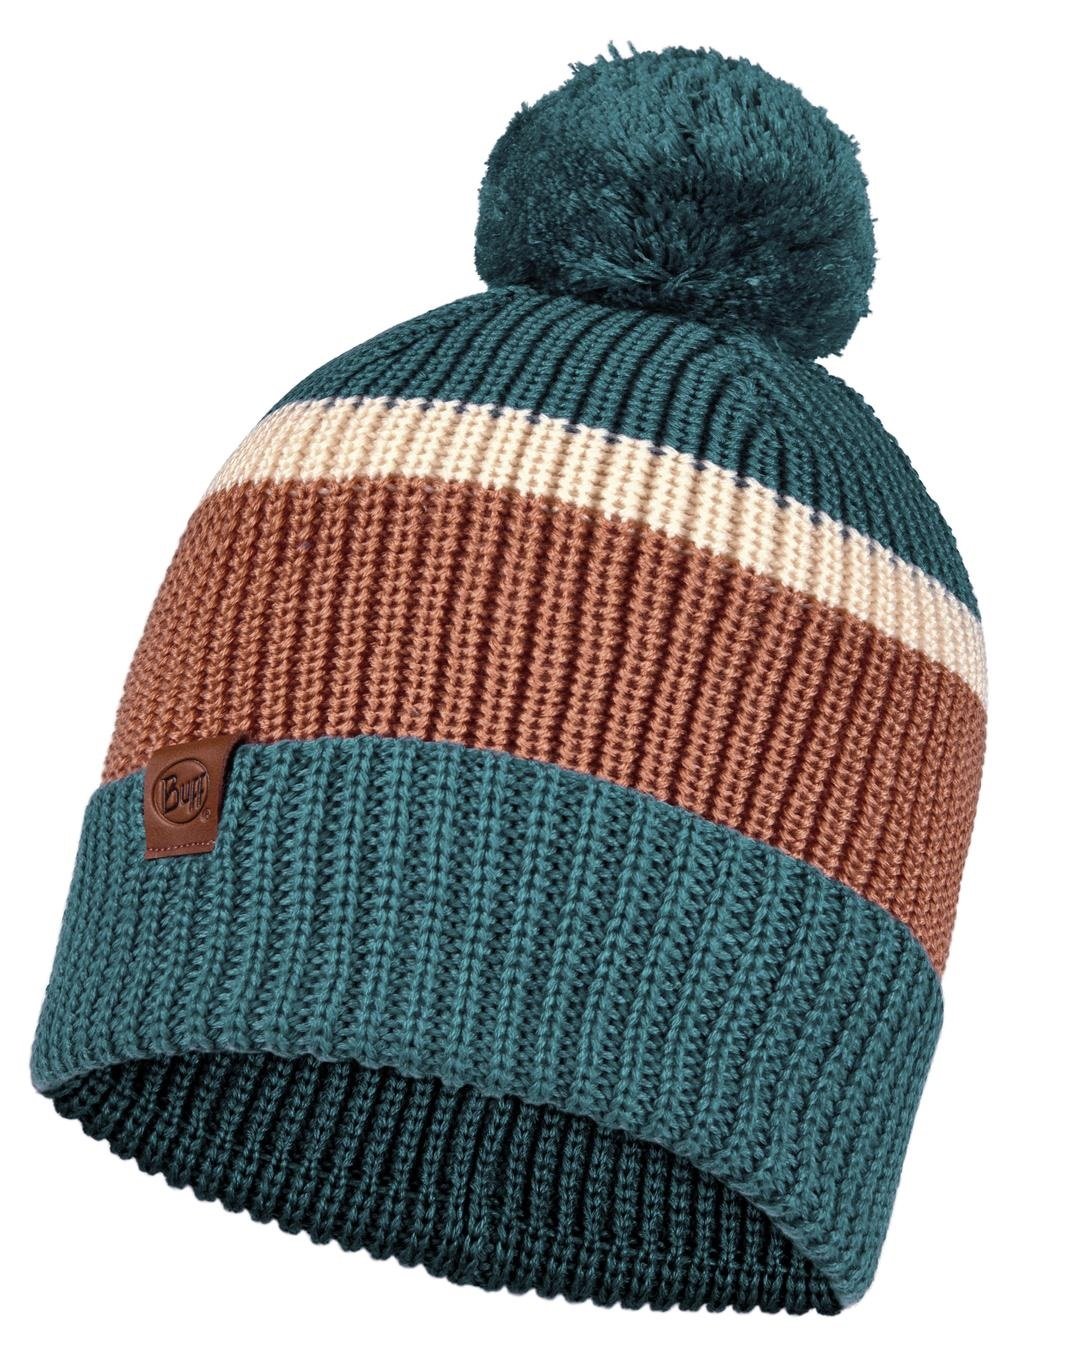 Шапка Buff Knitted Hat Elon Dusty Blue, US:One size, 126464.742.10.00 шапка buff knitted hat bonky anita rosé us one size 129626 538 10 00